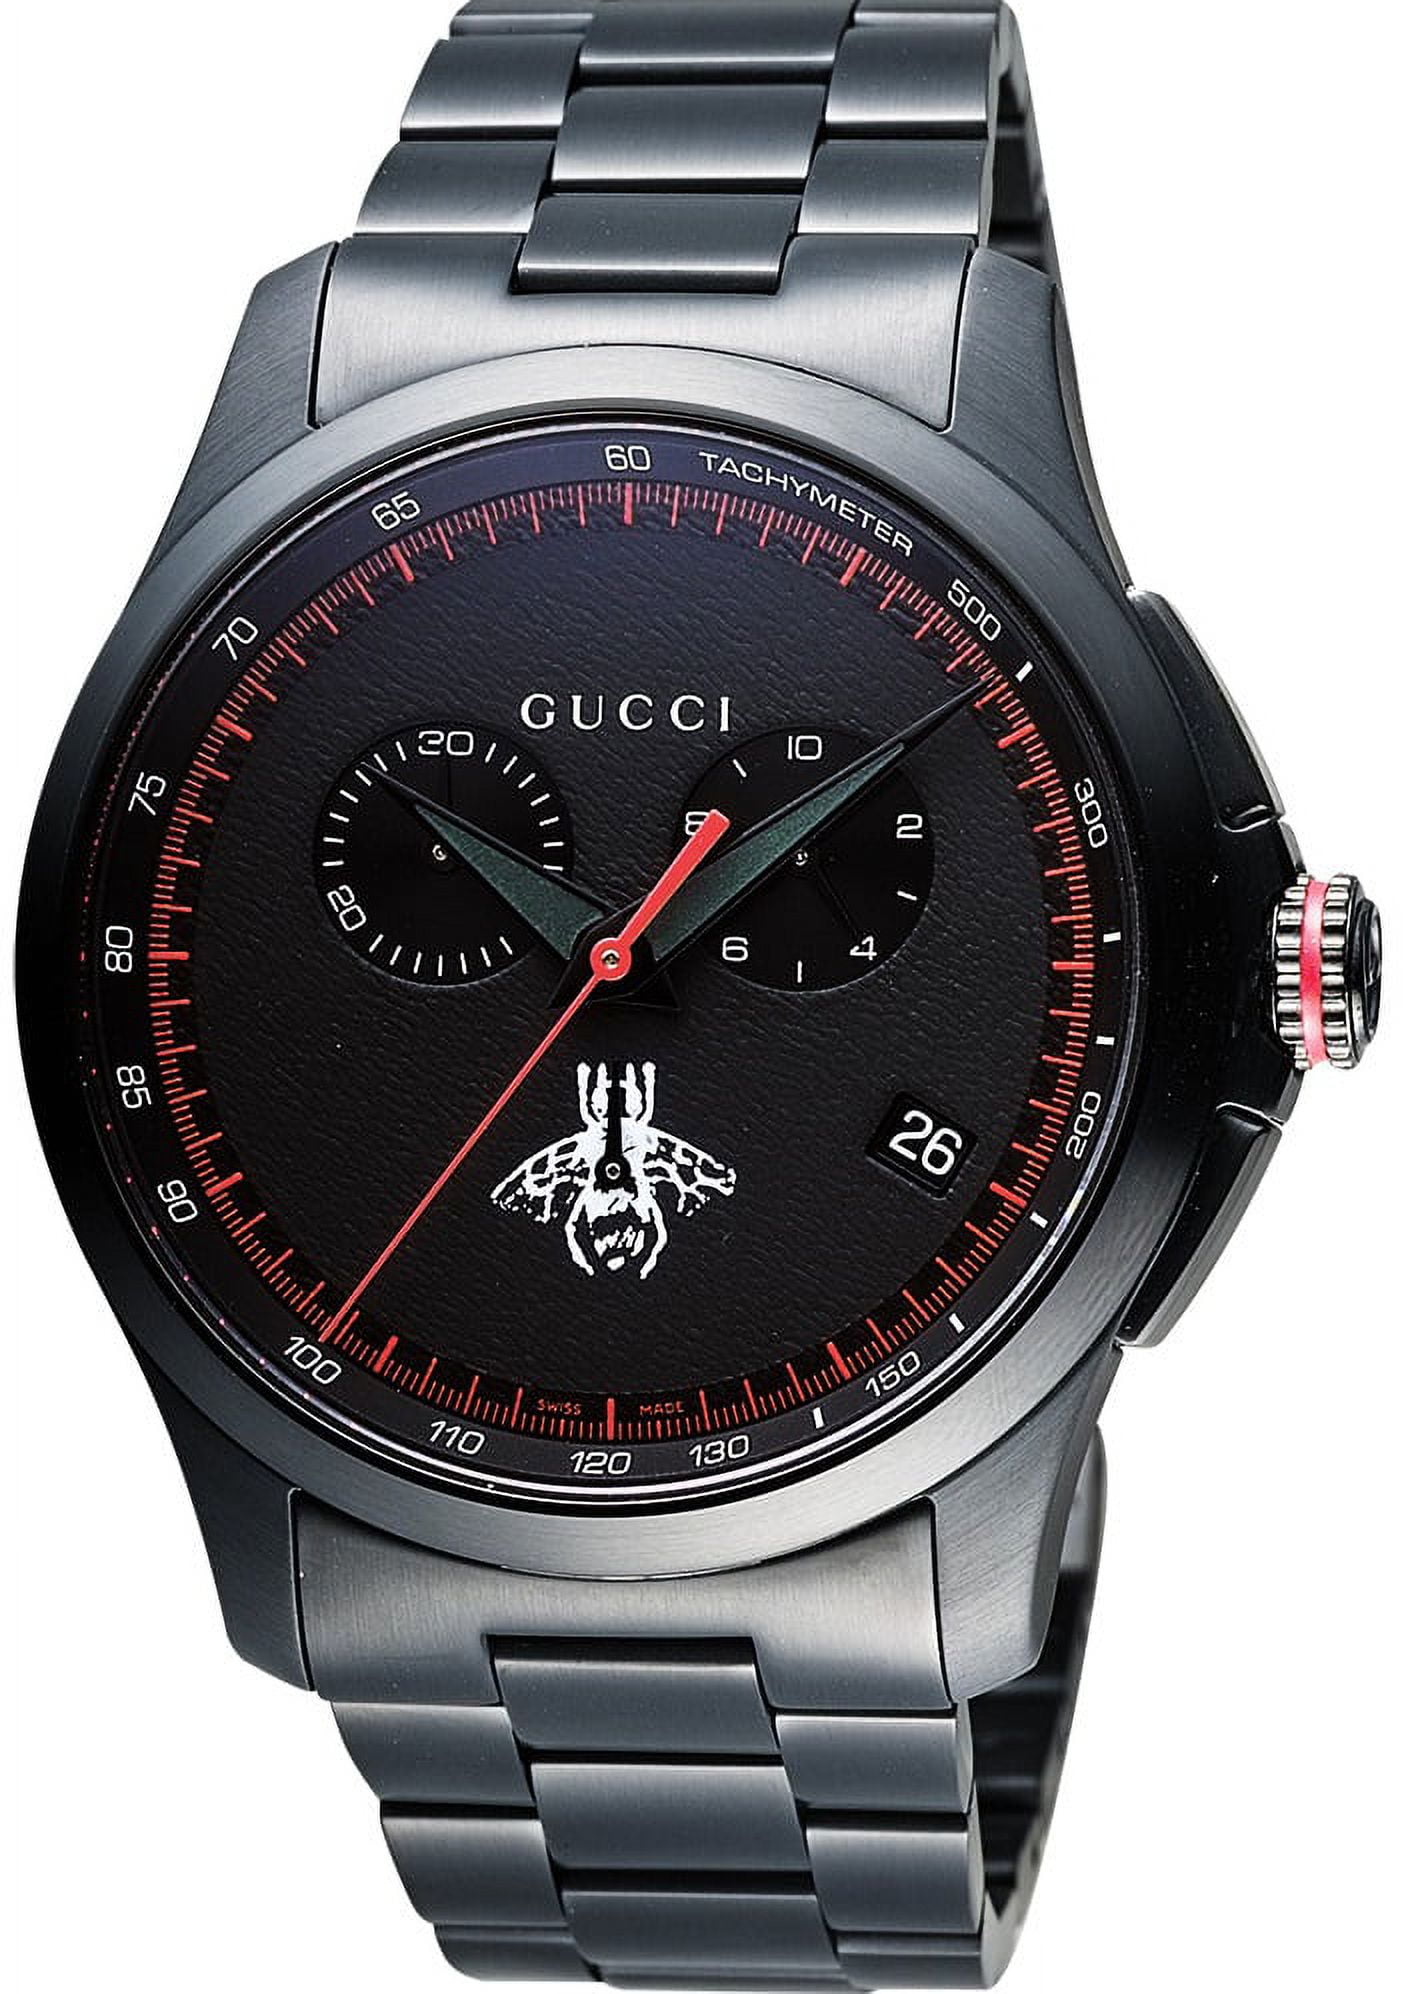 Gucci G-Timeless Black Stainless Steel Chronograph Mens Watch